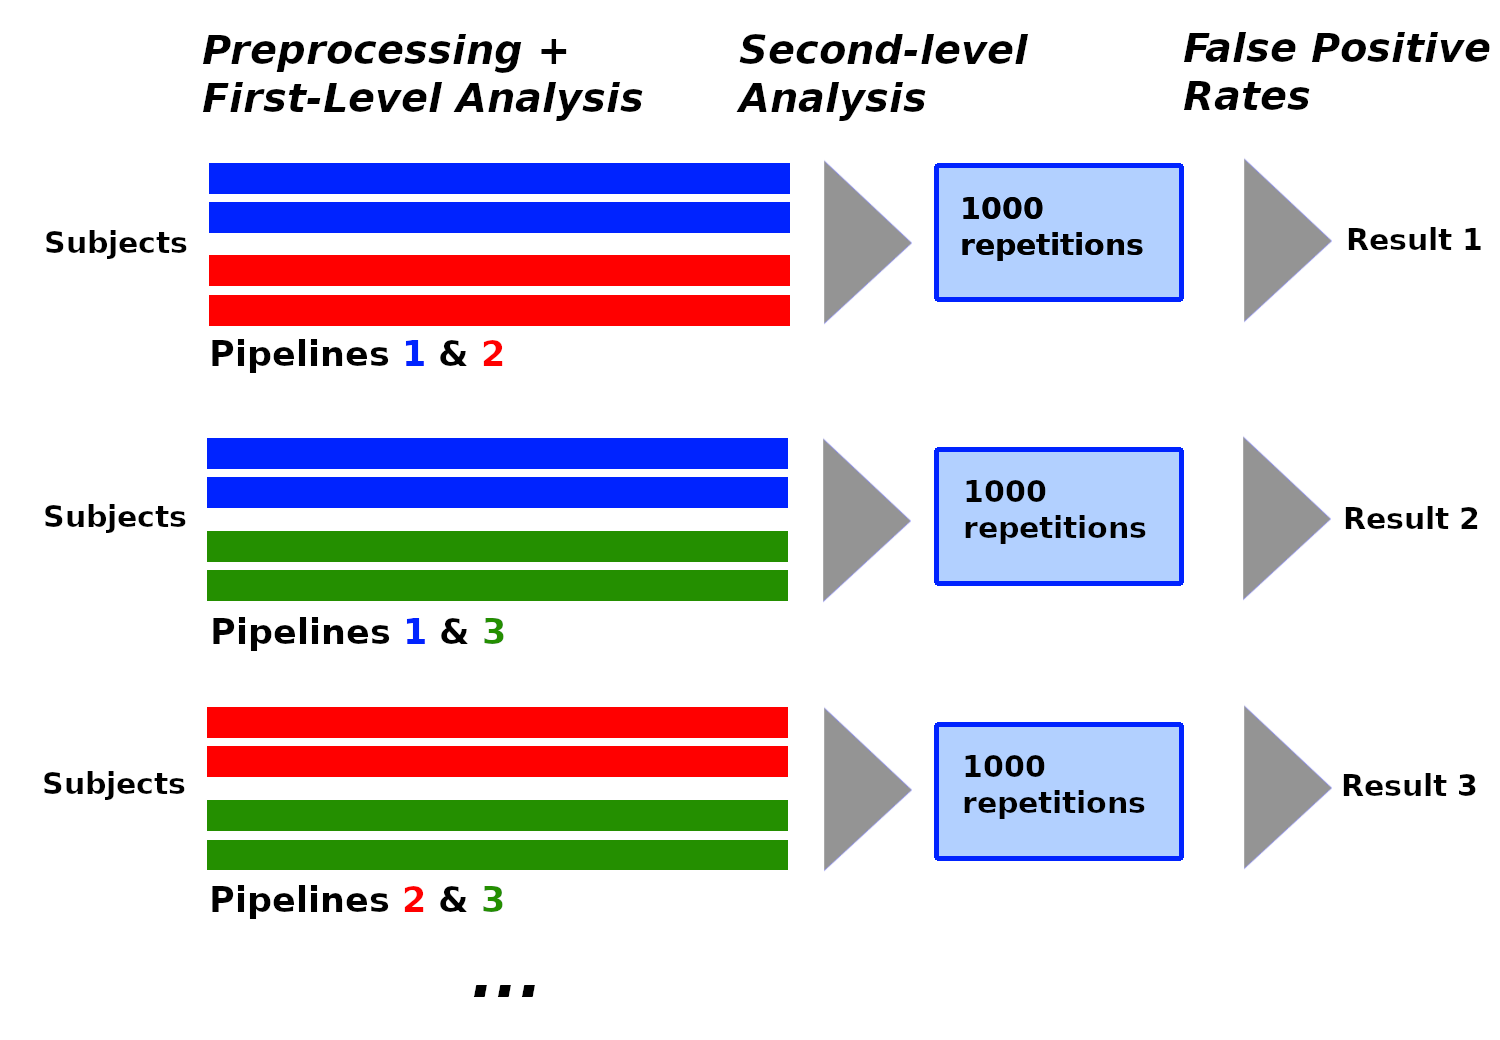 Towards efficient fMRI data re-use: can we run between-group analyses with datasets processed differently? Steps performed for the analysis: subject-level analysis on subject data with different pipelines, between-group analyses with subject data processed differently for multiple pairs of pipelines, and repetitions of each analysis 1000 times to estimate the false positive rates.